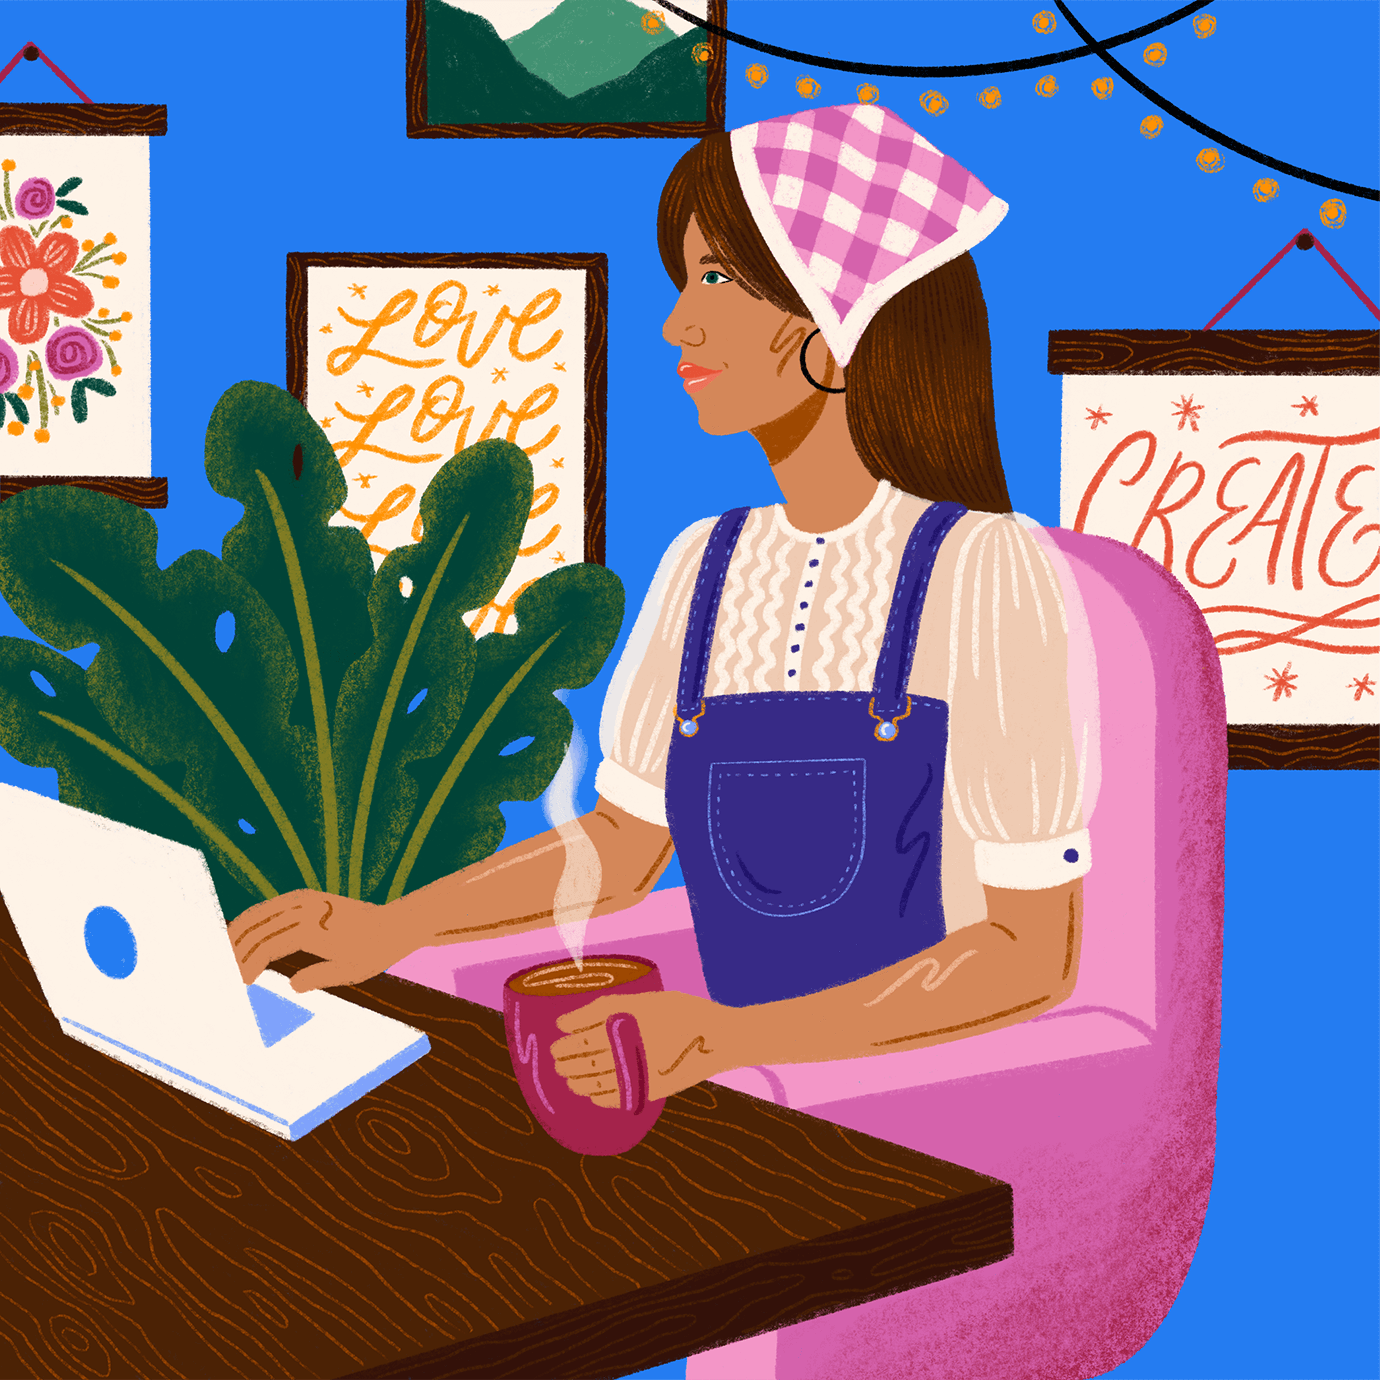 Work from home by Andrea Rochelle